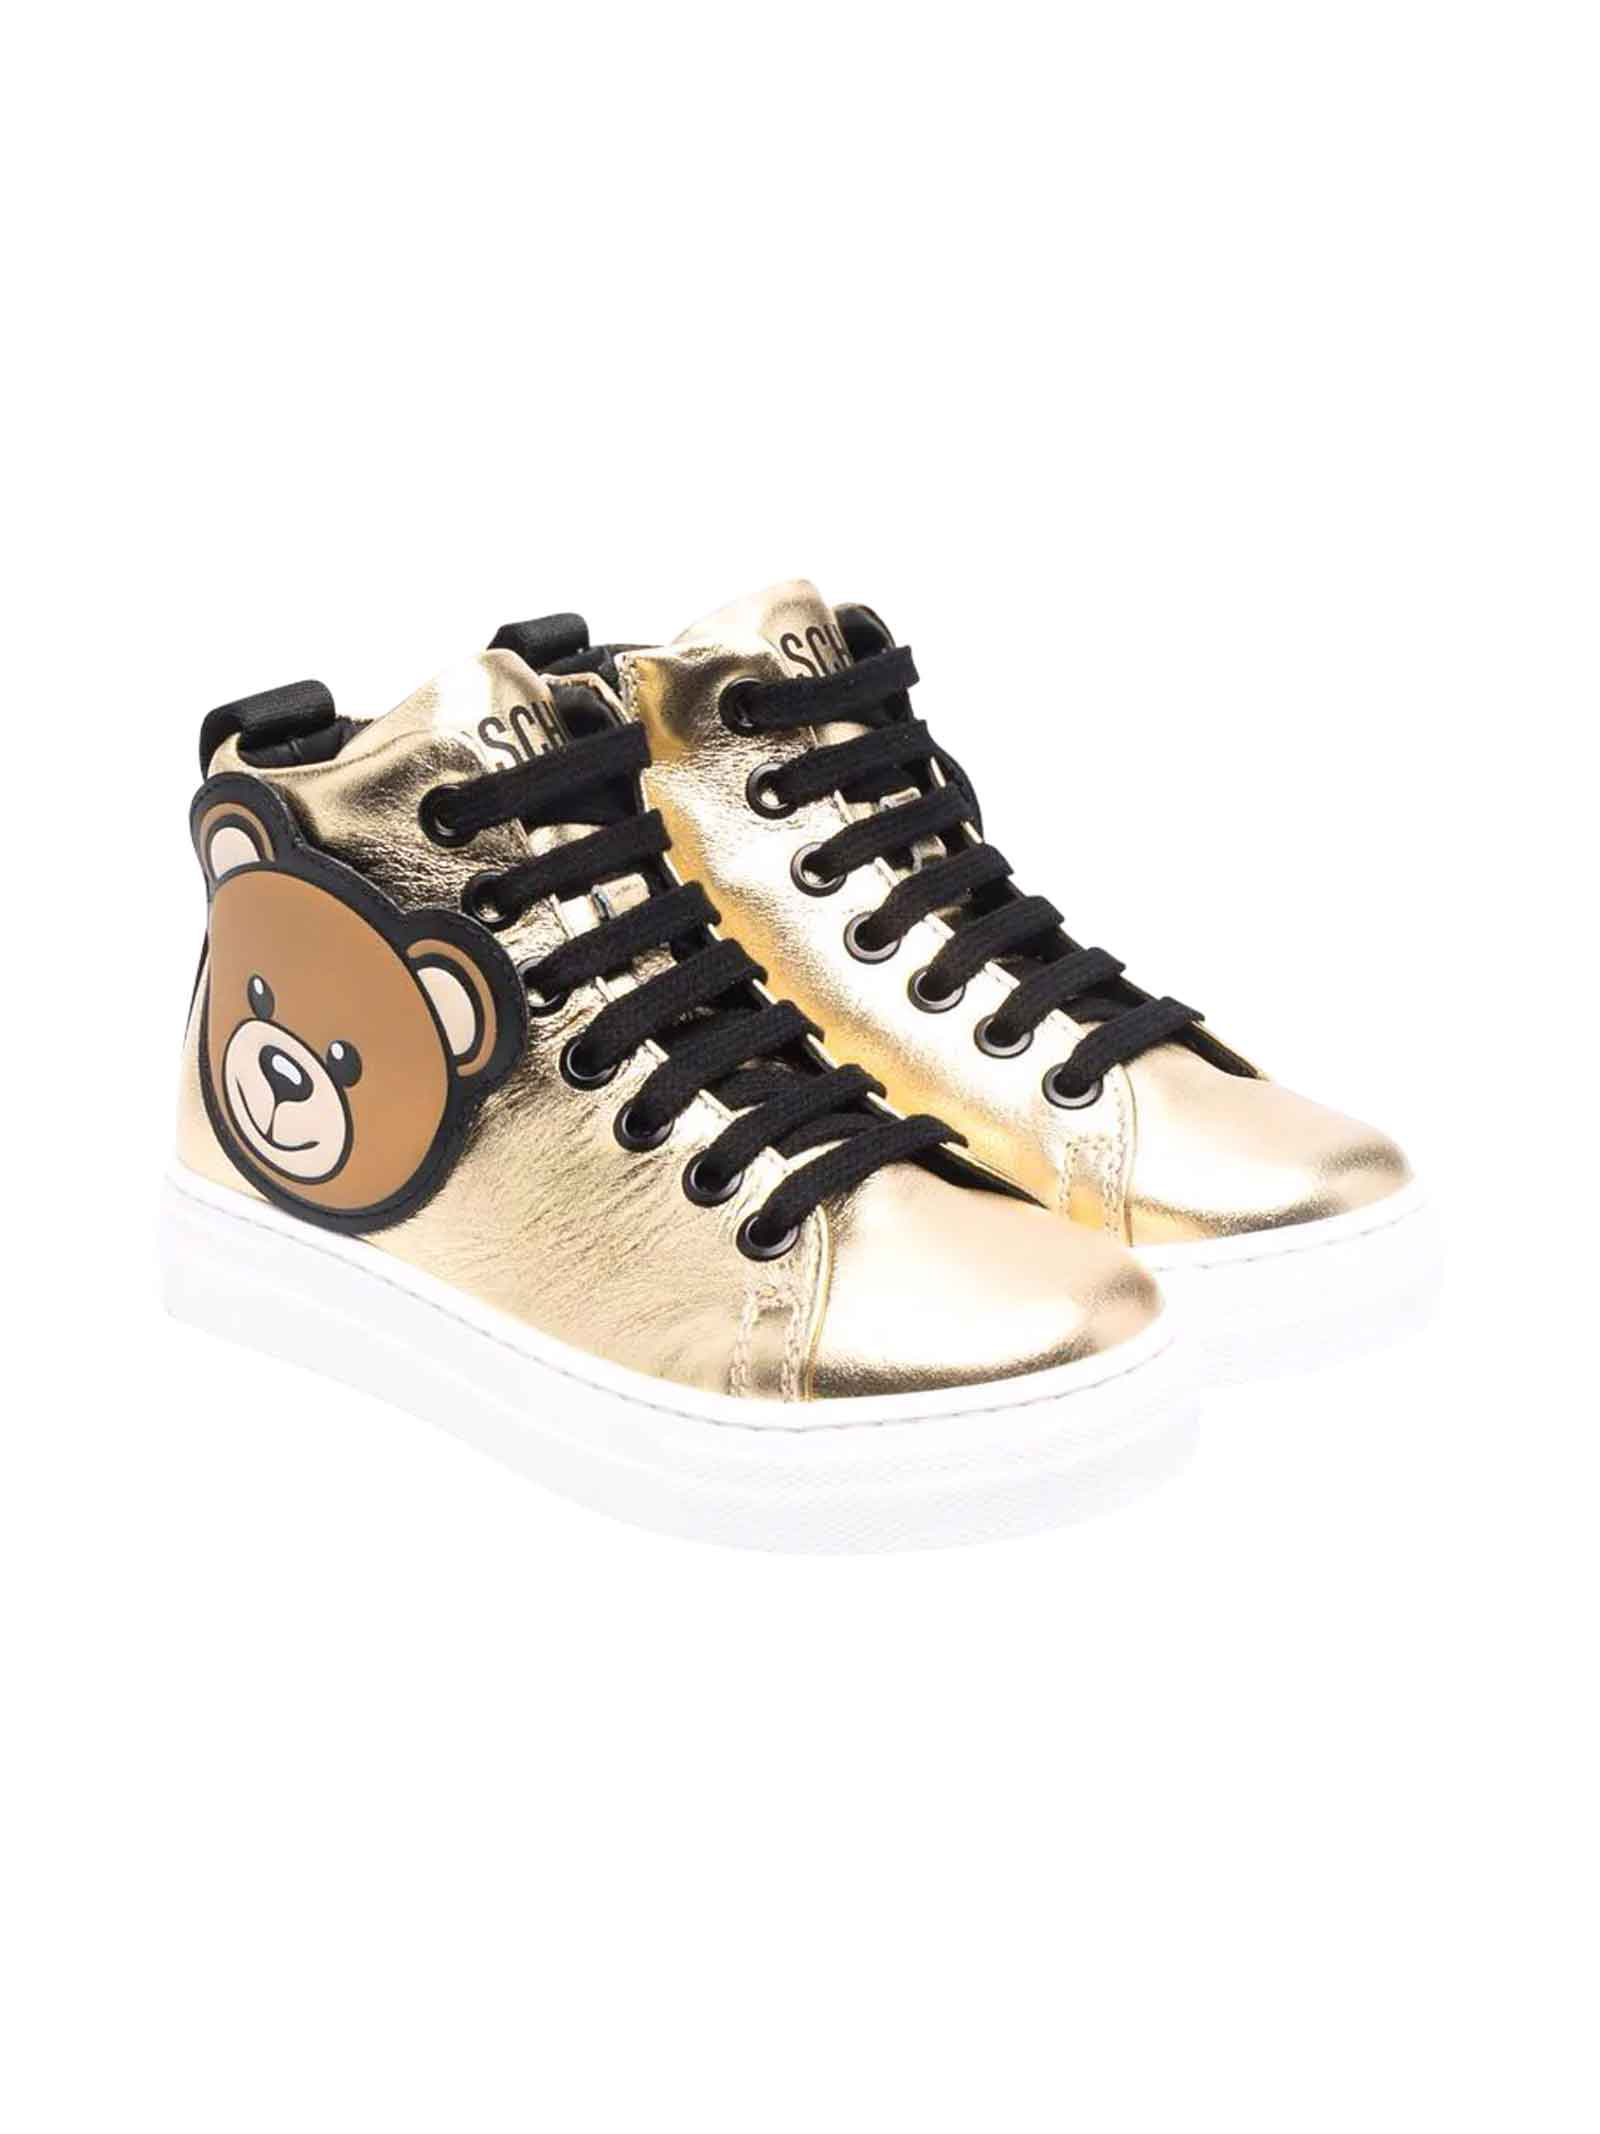 Moschino Unisex Gold Sneakers